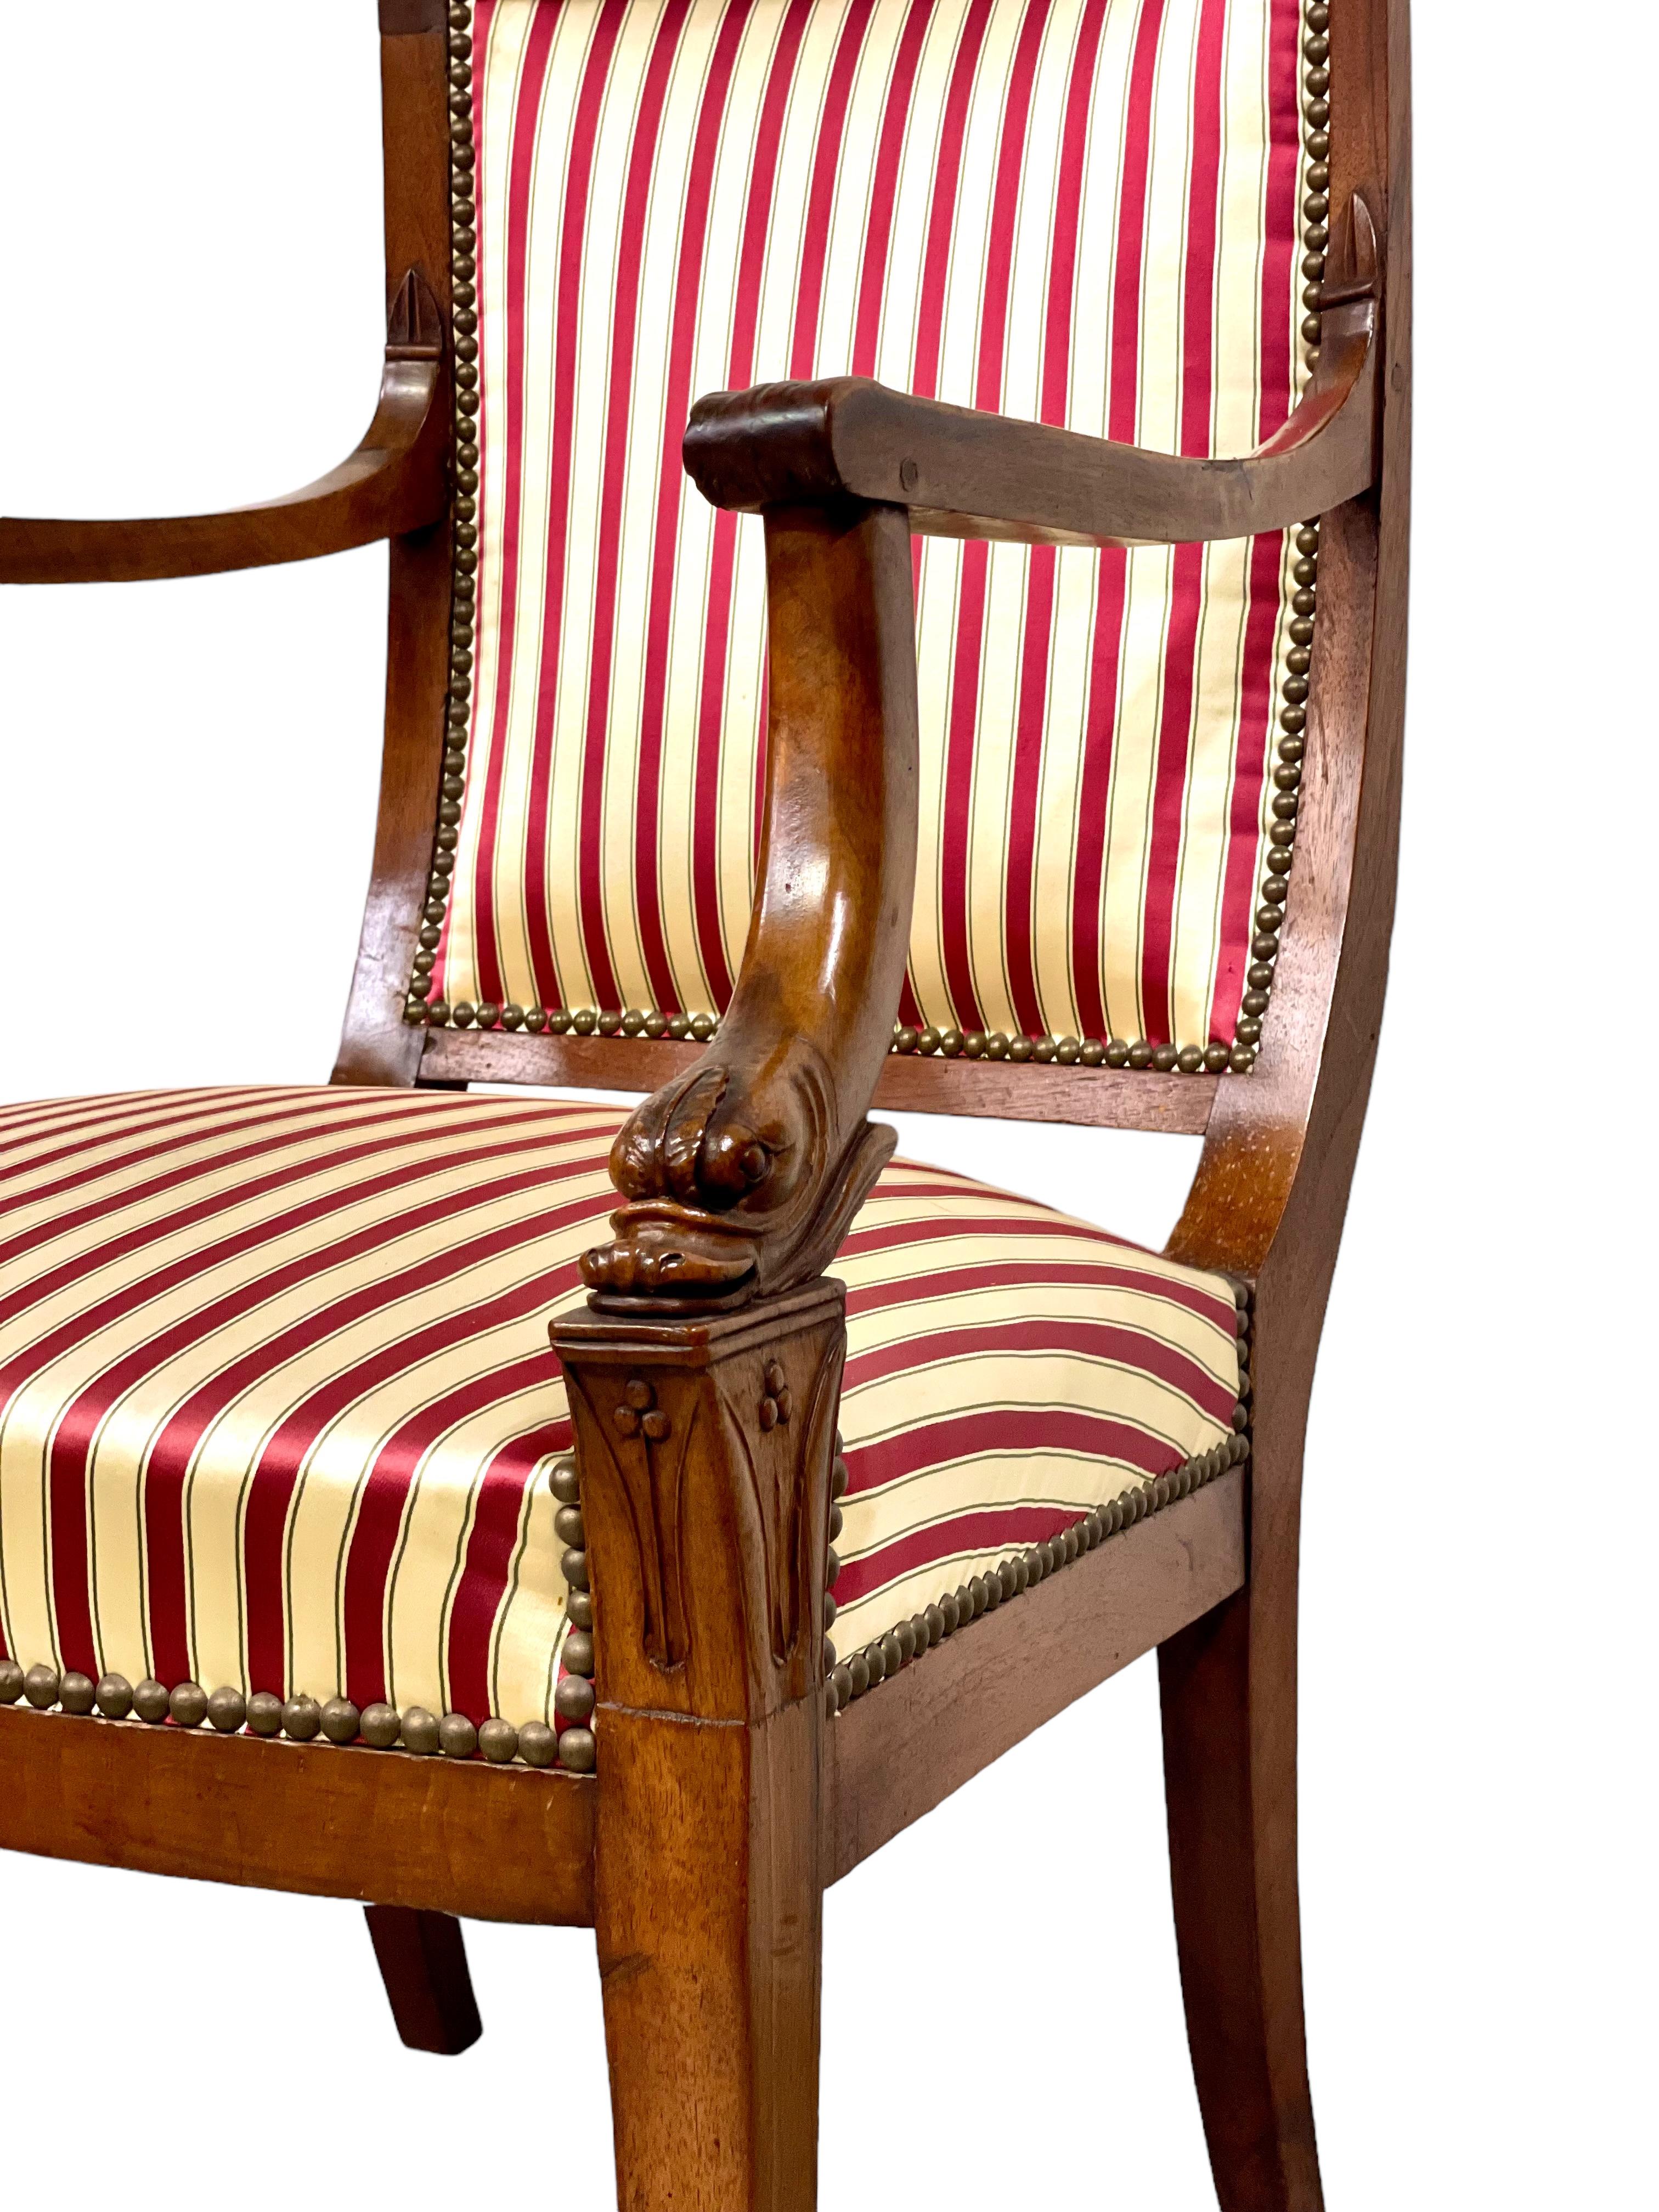 A fine Empire armchair with four elegant saber legs, upholstered in vertical cream and crimson stripes, and featuring ornately carved dolphins' heads at the base of each shaped arm rest. This stately and very handsome chair has a wide, comfortably